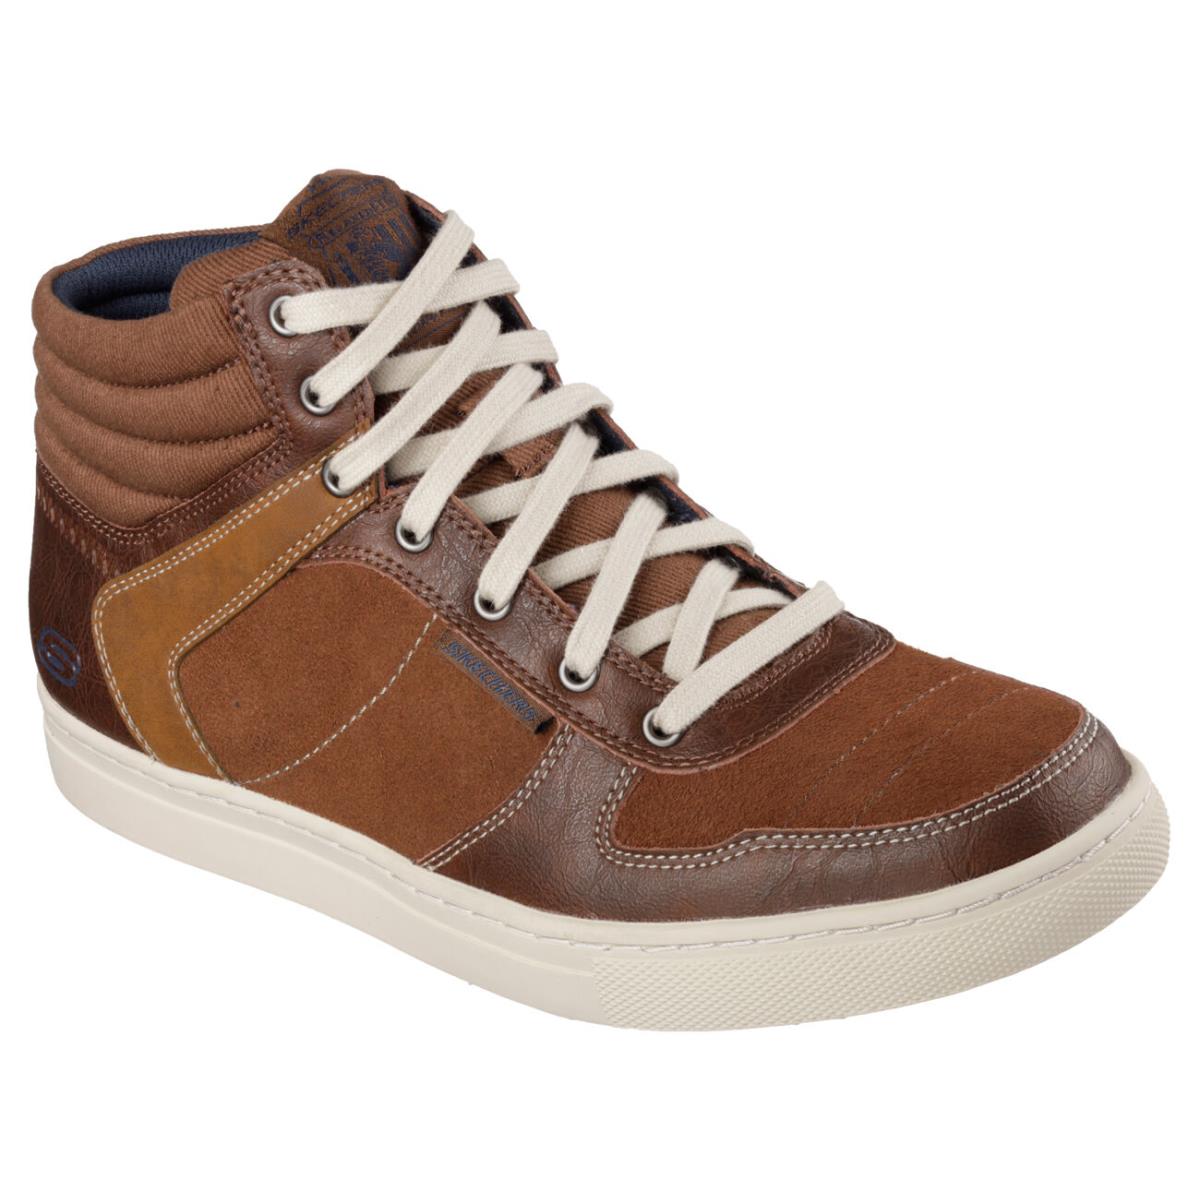 Men`s Skechers Relaxed Fit: Elvino - Staley Casual Shoe 64792 Lug Sizes 8-14 - Luggage